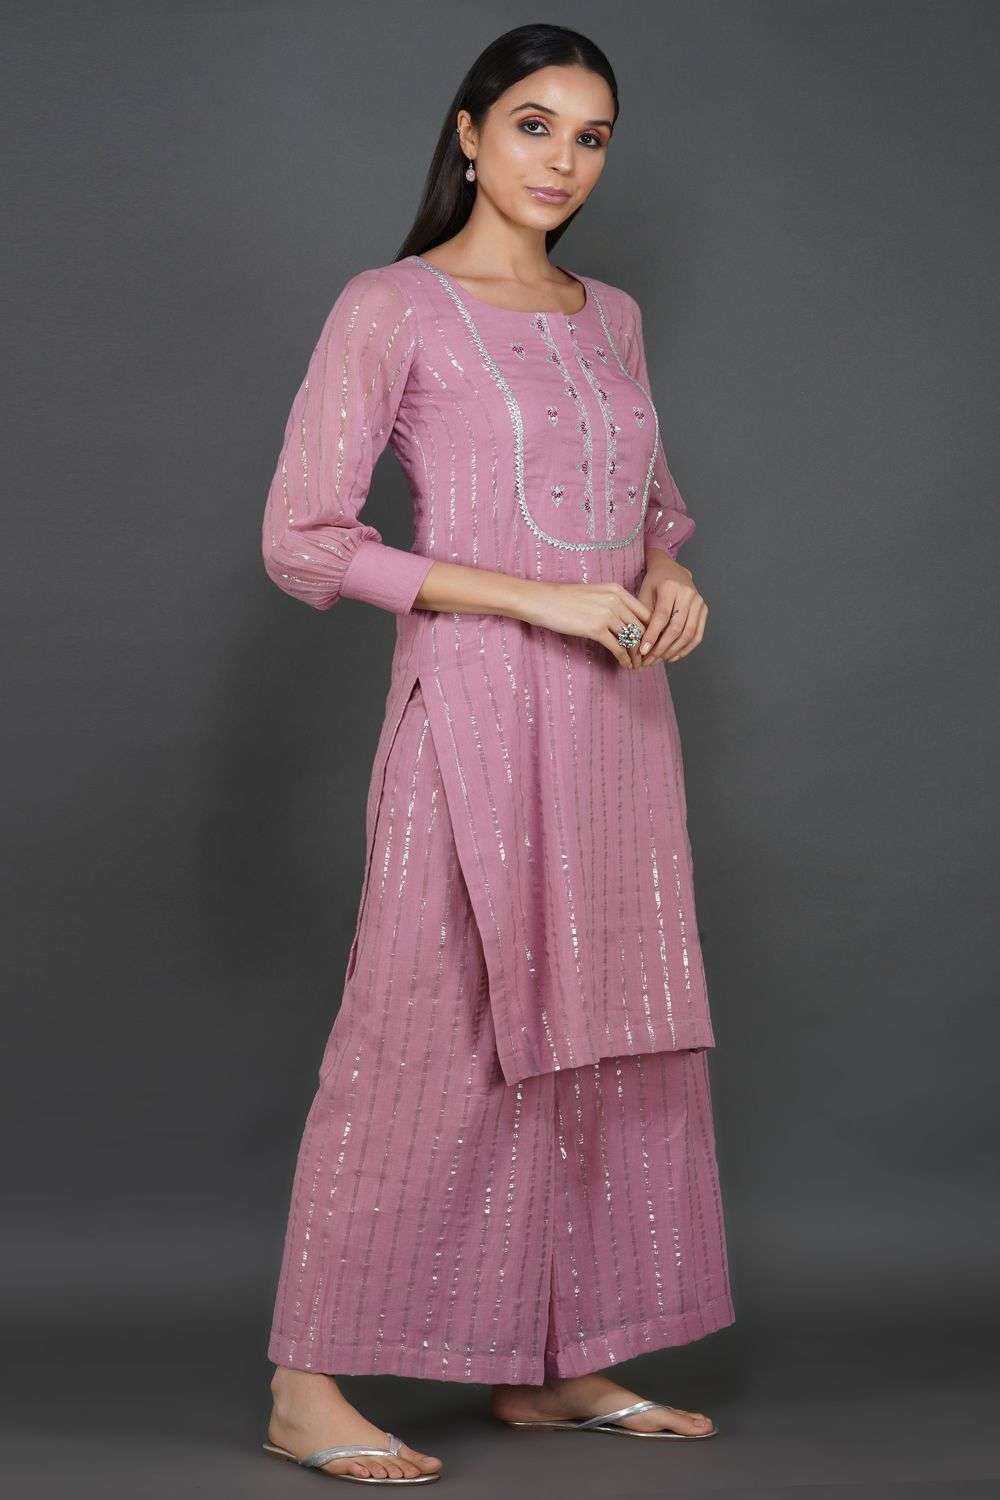 Buy Onion Pink Hand Embroidered Kurta Set Online at Best Price